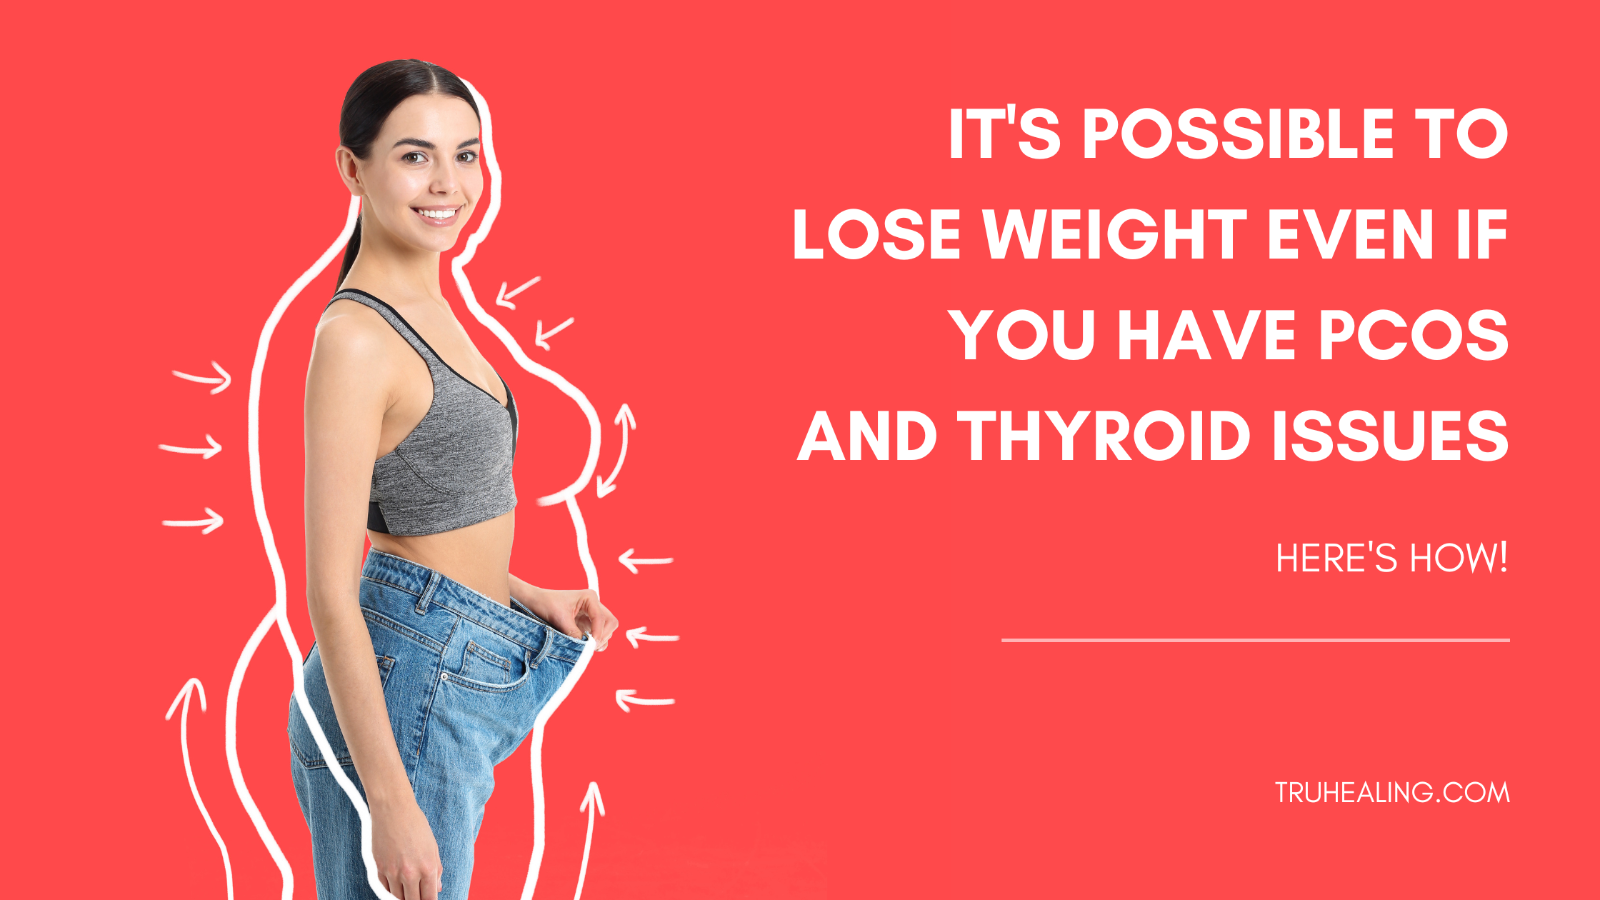 IT'S POSSIBLE TO LOSE WEIGHT EVEN IF YOU HAVE PCOS AND THYROID ISSUES